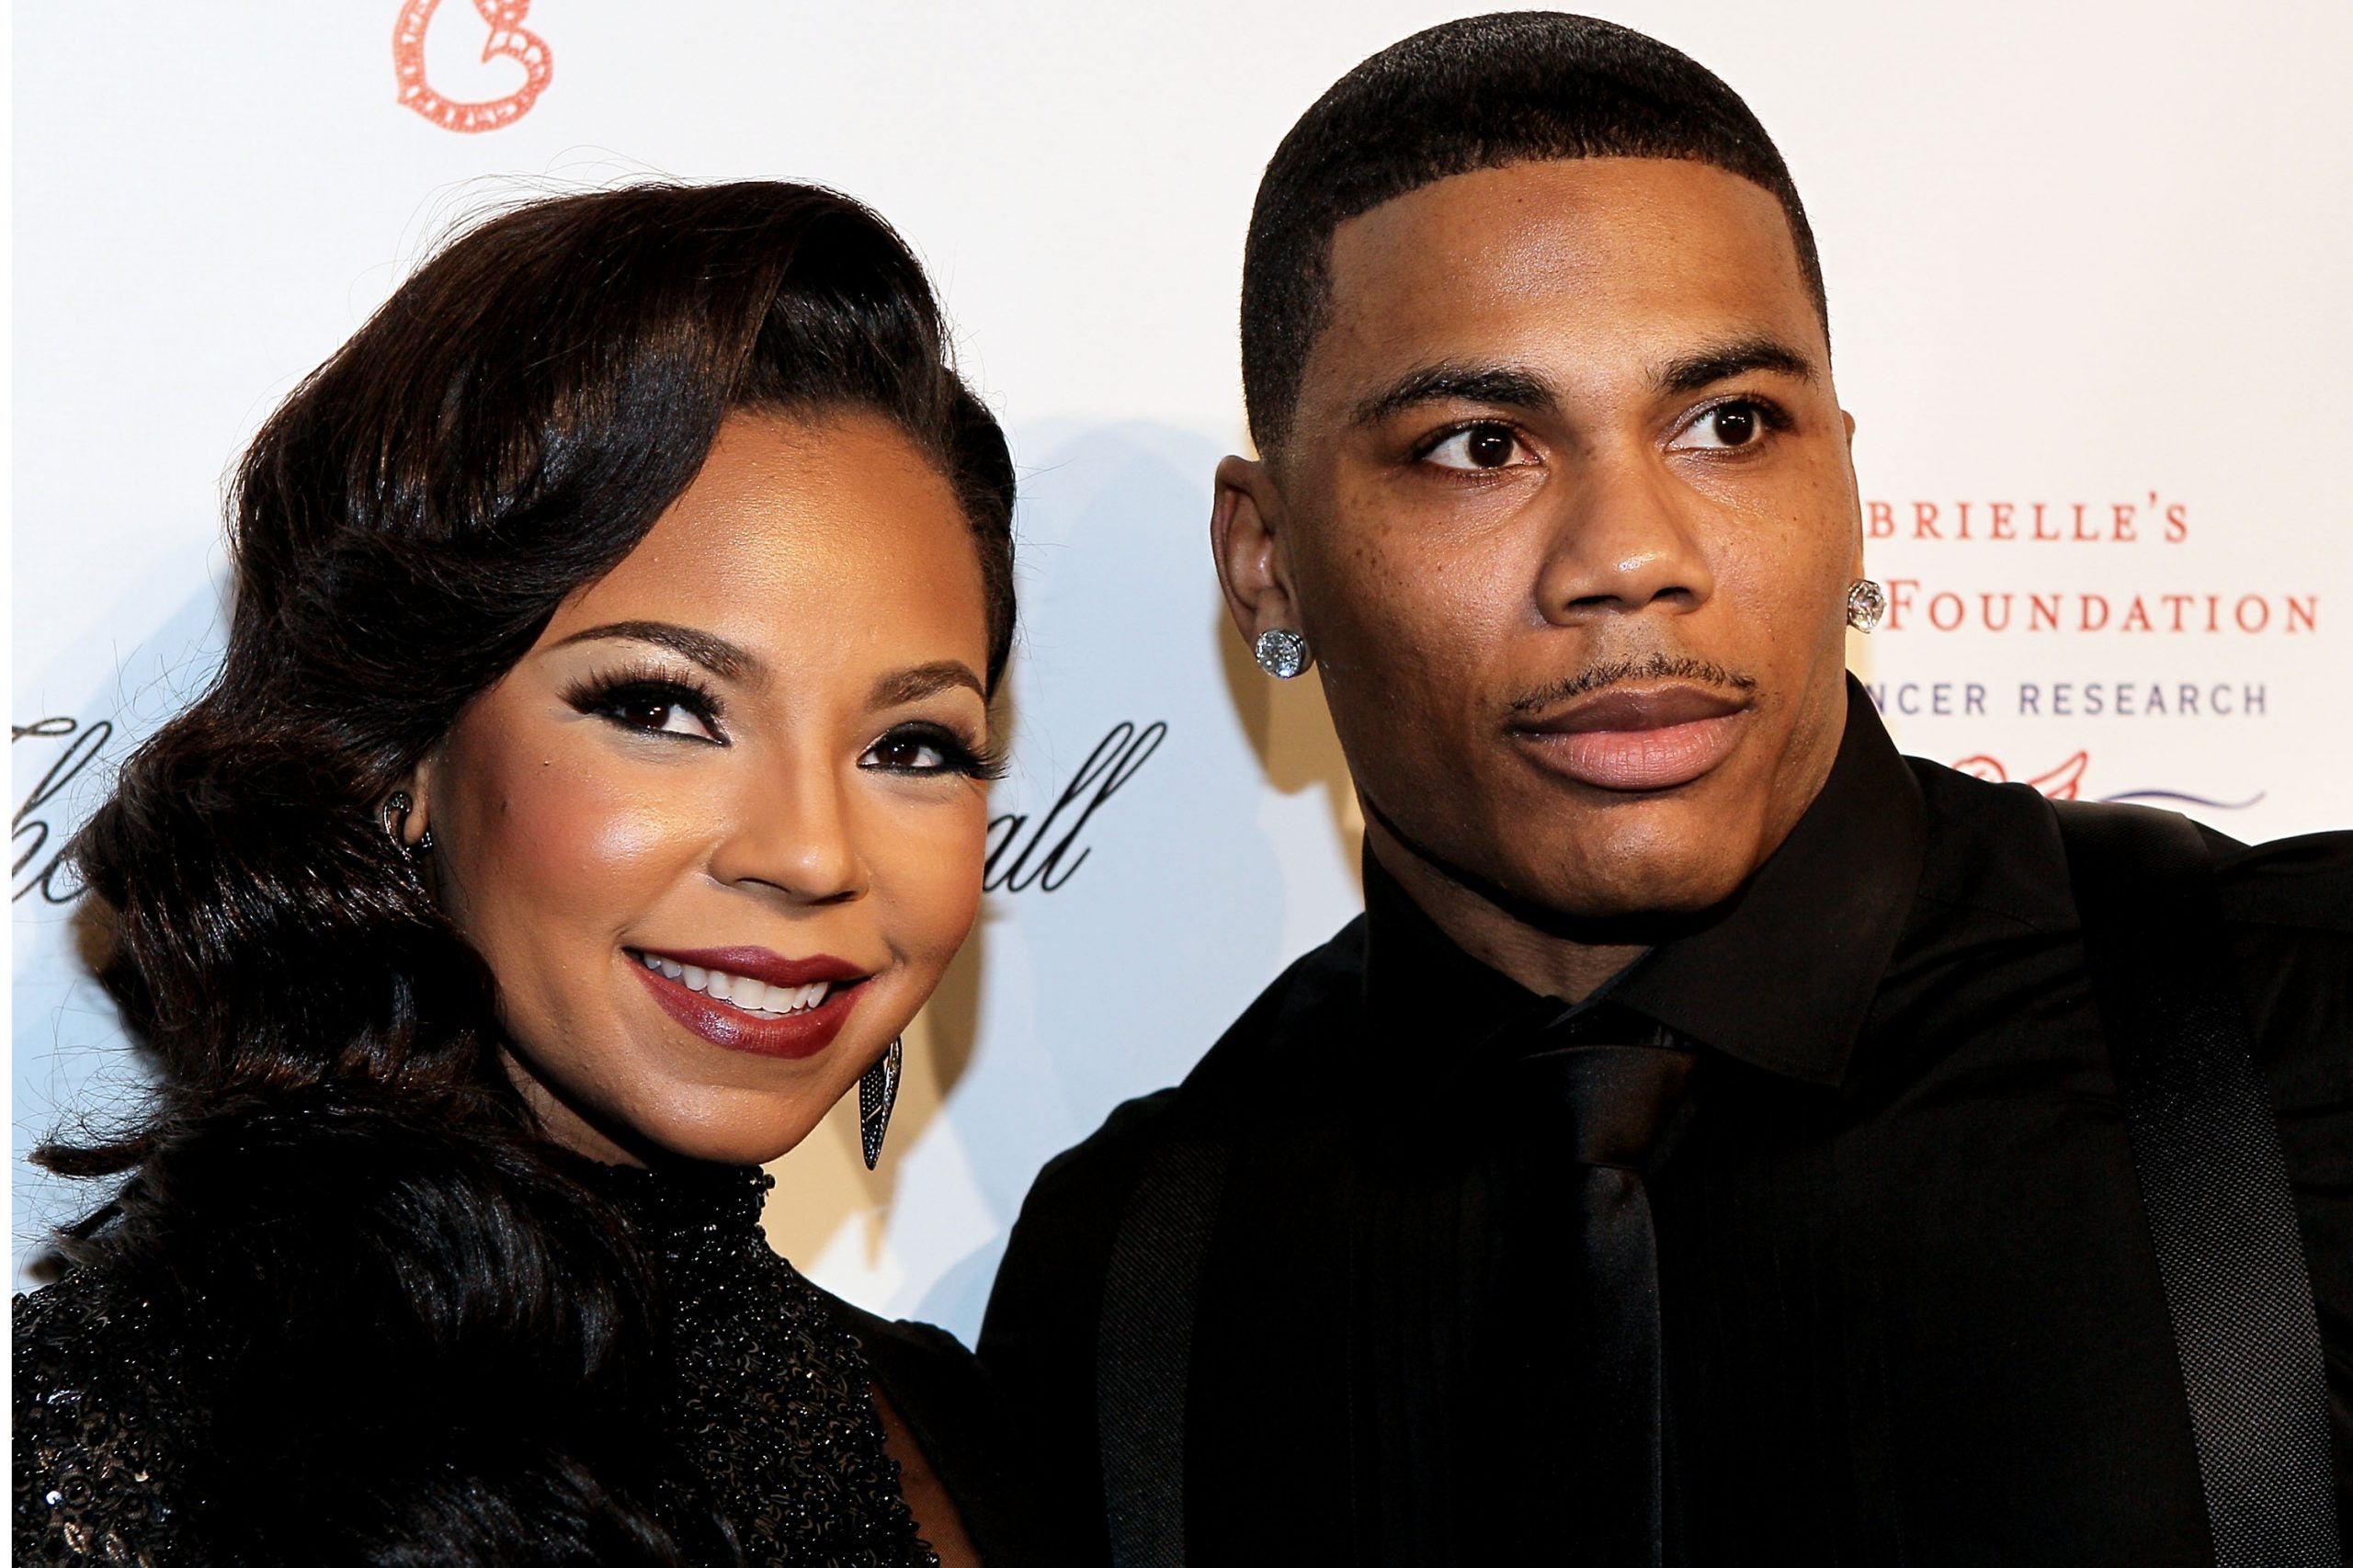 Ashanti Says Hug From Nelly At Verzuz Was Unexpected: 'I Haven't Seen Him Or Spoken To Him Since We Broke Up'